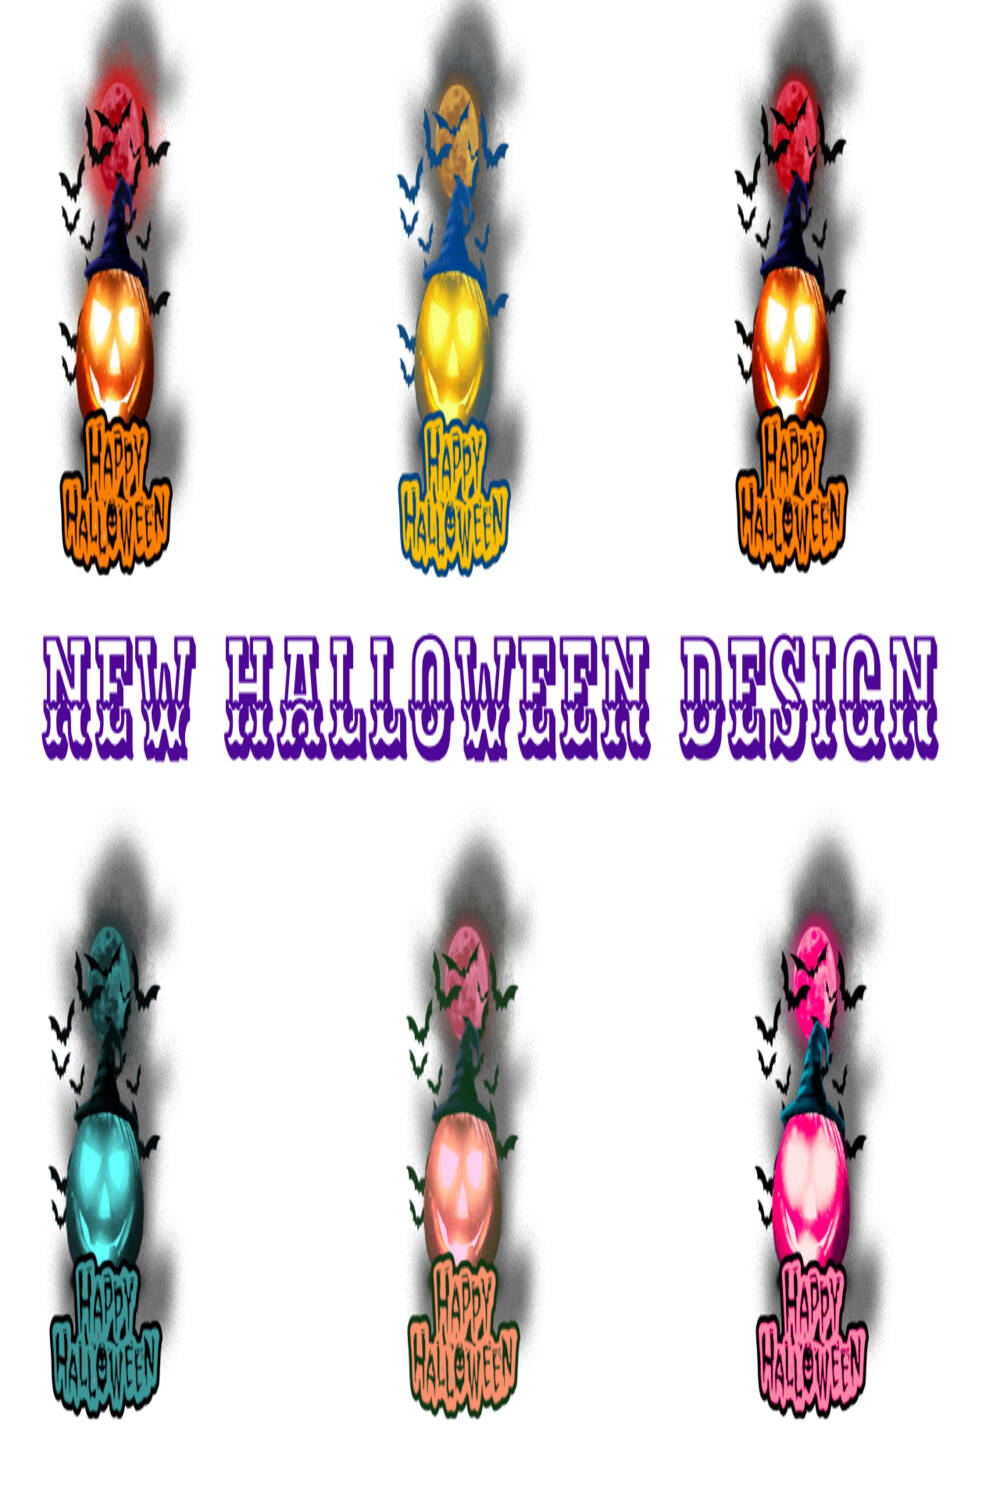 I will do awesome custom halloween t shirt designs for pod business pinterest preview image.